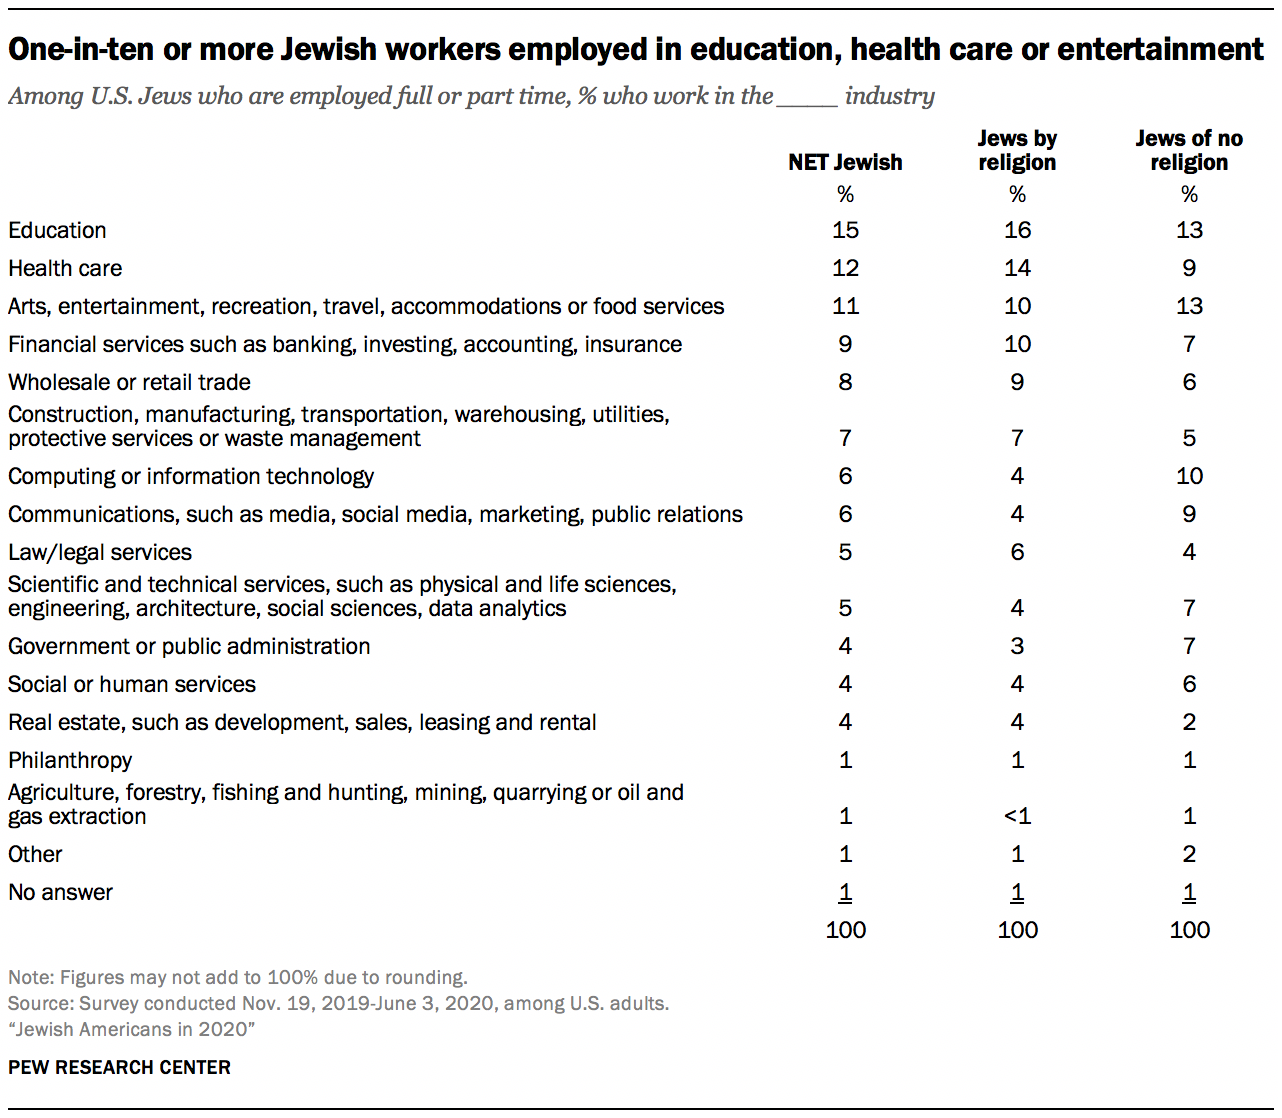 One-in-ten or more Jewish workers employed in education, health care or entertainment